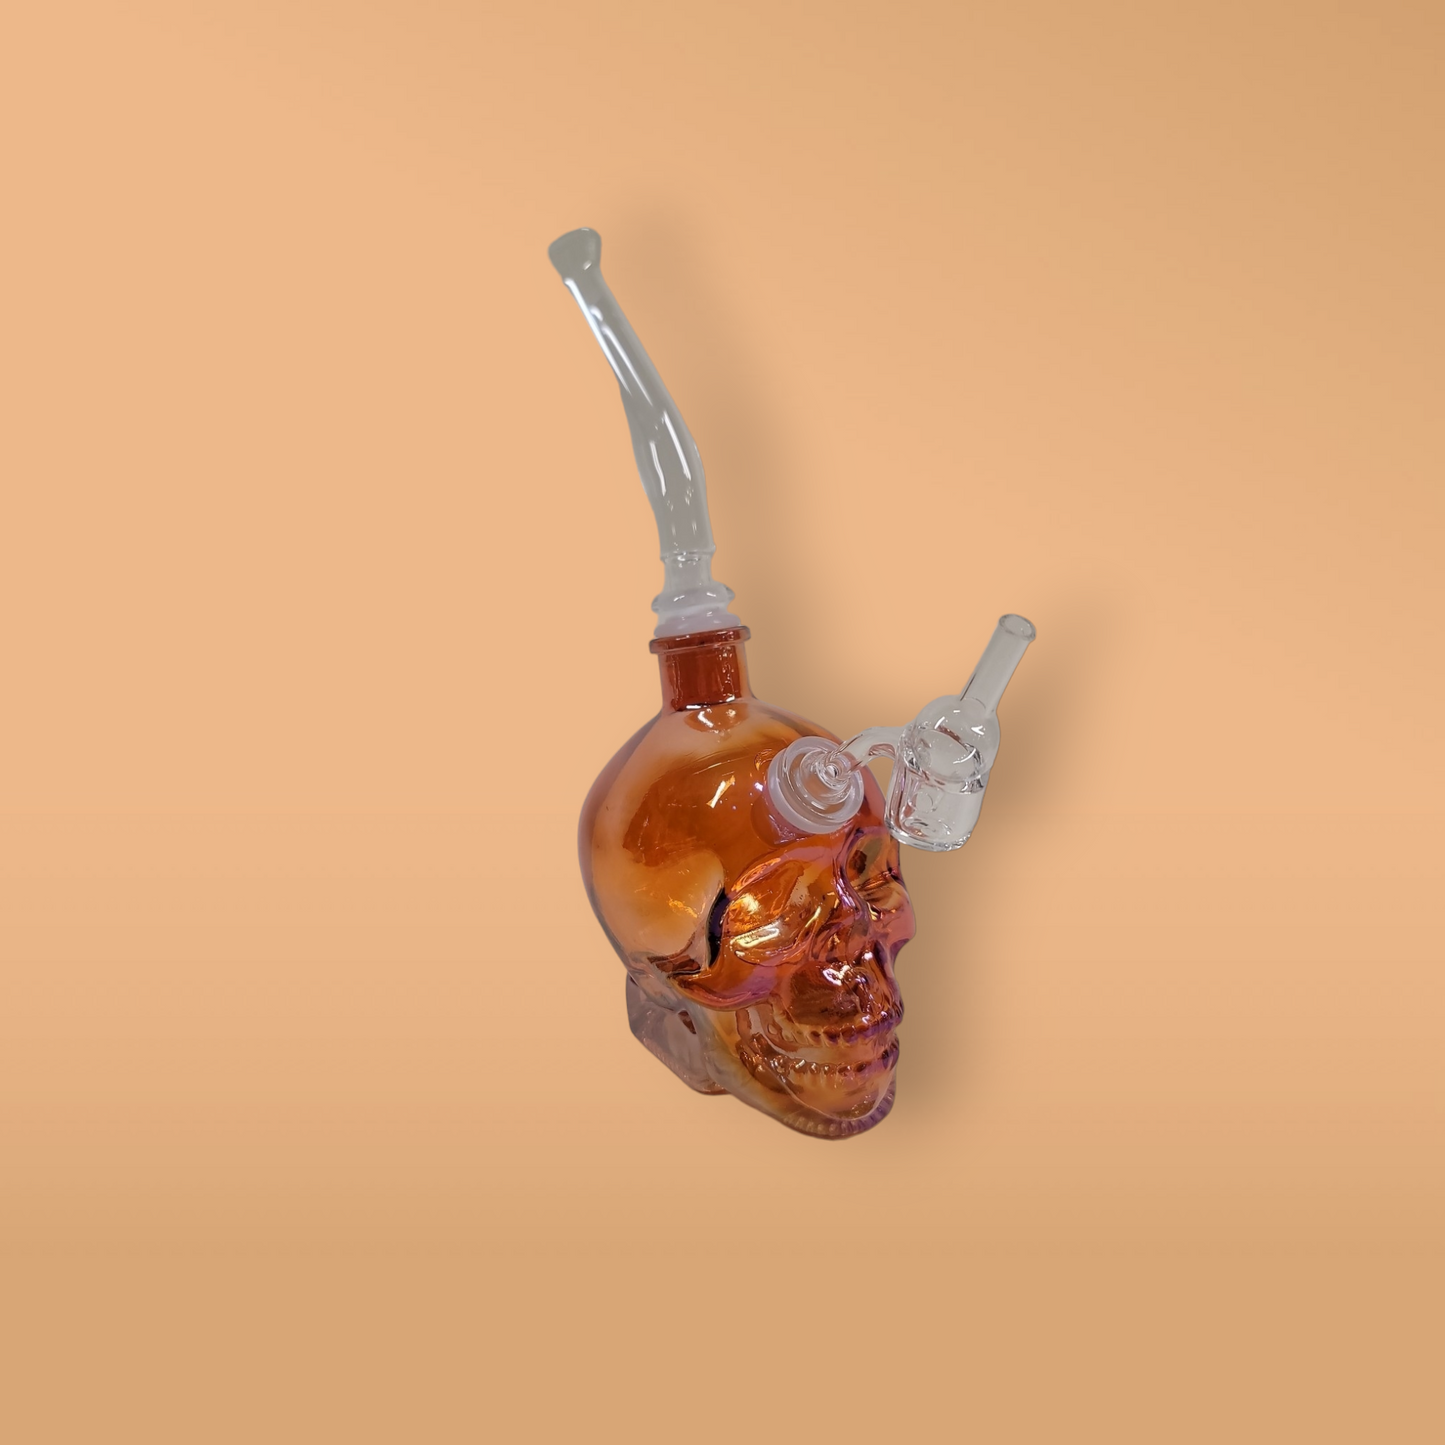 Deluxe Orange Iridescent Skull (with banger, carb cap, bowl piece, and mouth extension)